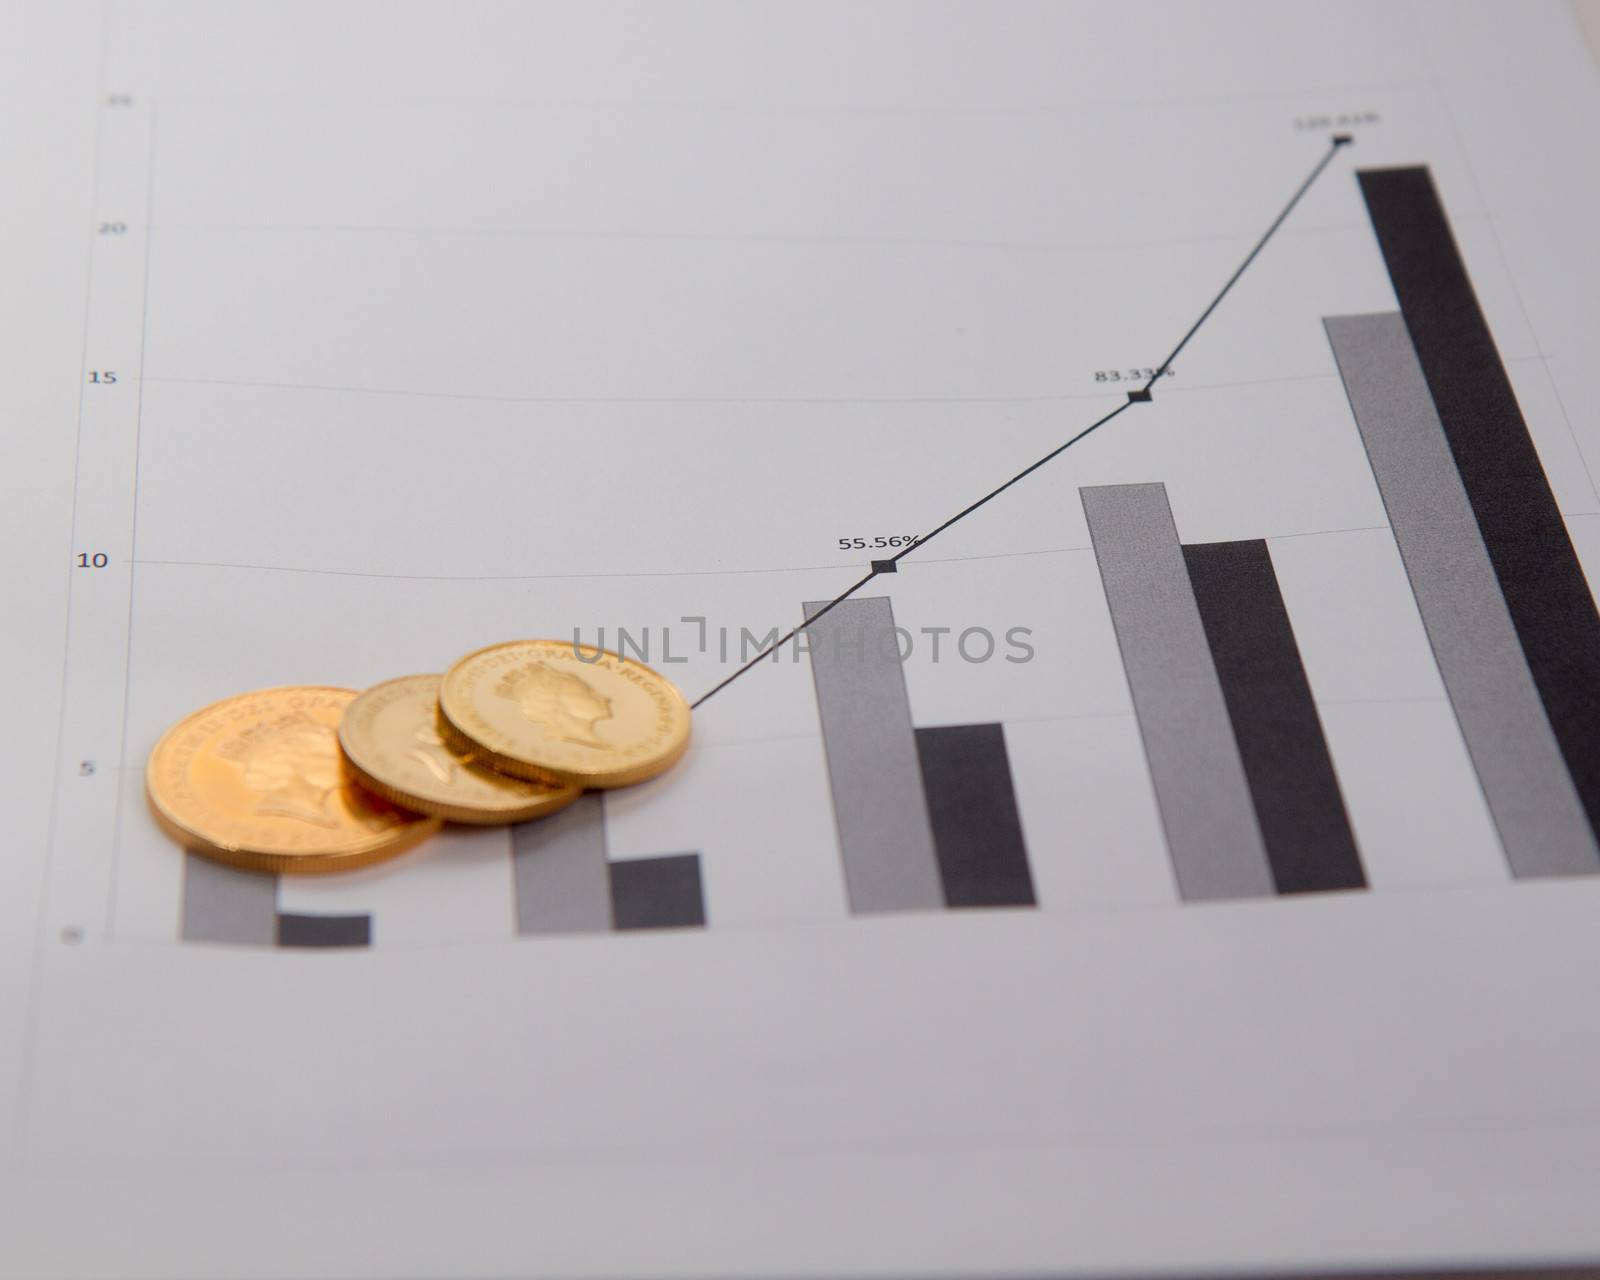 Gold coins on financial chart by imagesbykenny